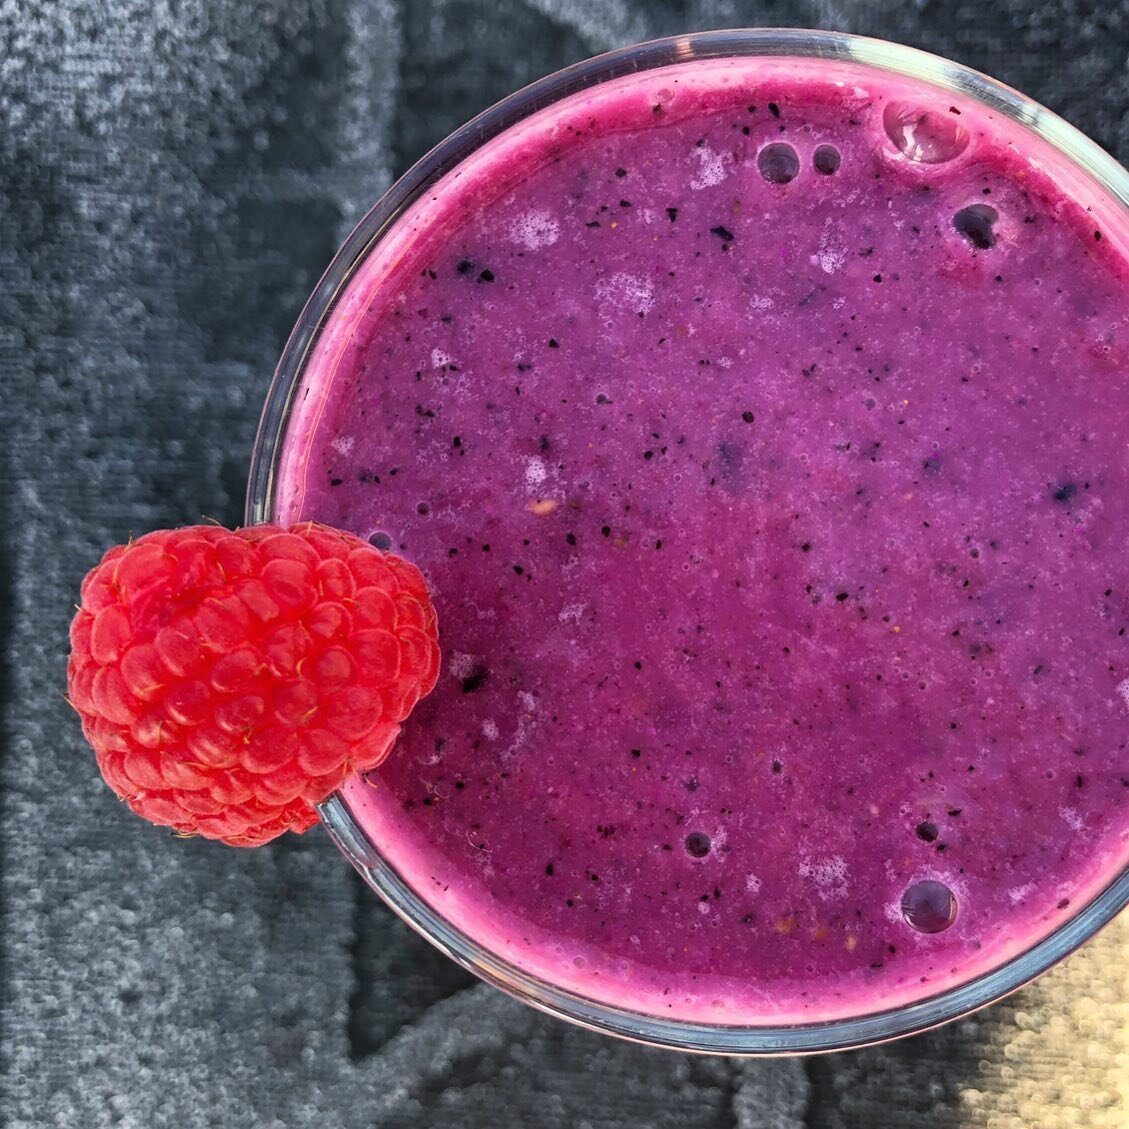 Frosty Pink Smoothie❄️💕
✔️1 Banana
✔️1 cup pea protein milk
✔️1 cup spinach
✔️1 cup frozen dragonfruit(pitaya)
✔️1/2 cup raspberries
✔️1/4 cup blueberries
✔️1/4 cup frozen mango
✔️1 tsp of turmeric
.
.
The pea protein milk gives it such a smooth, ri